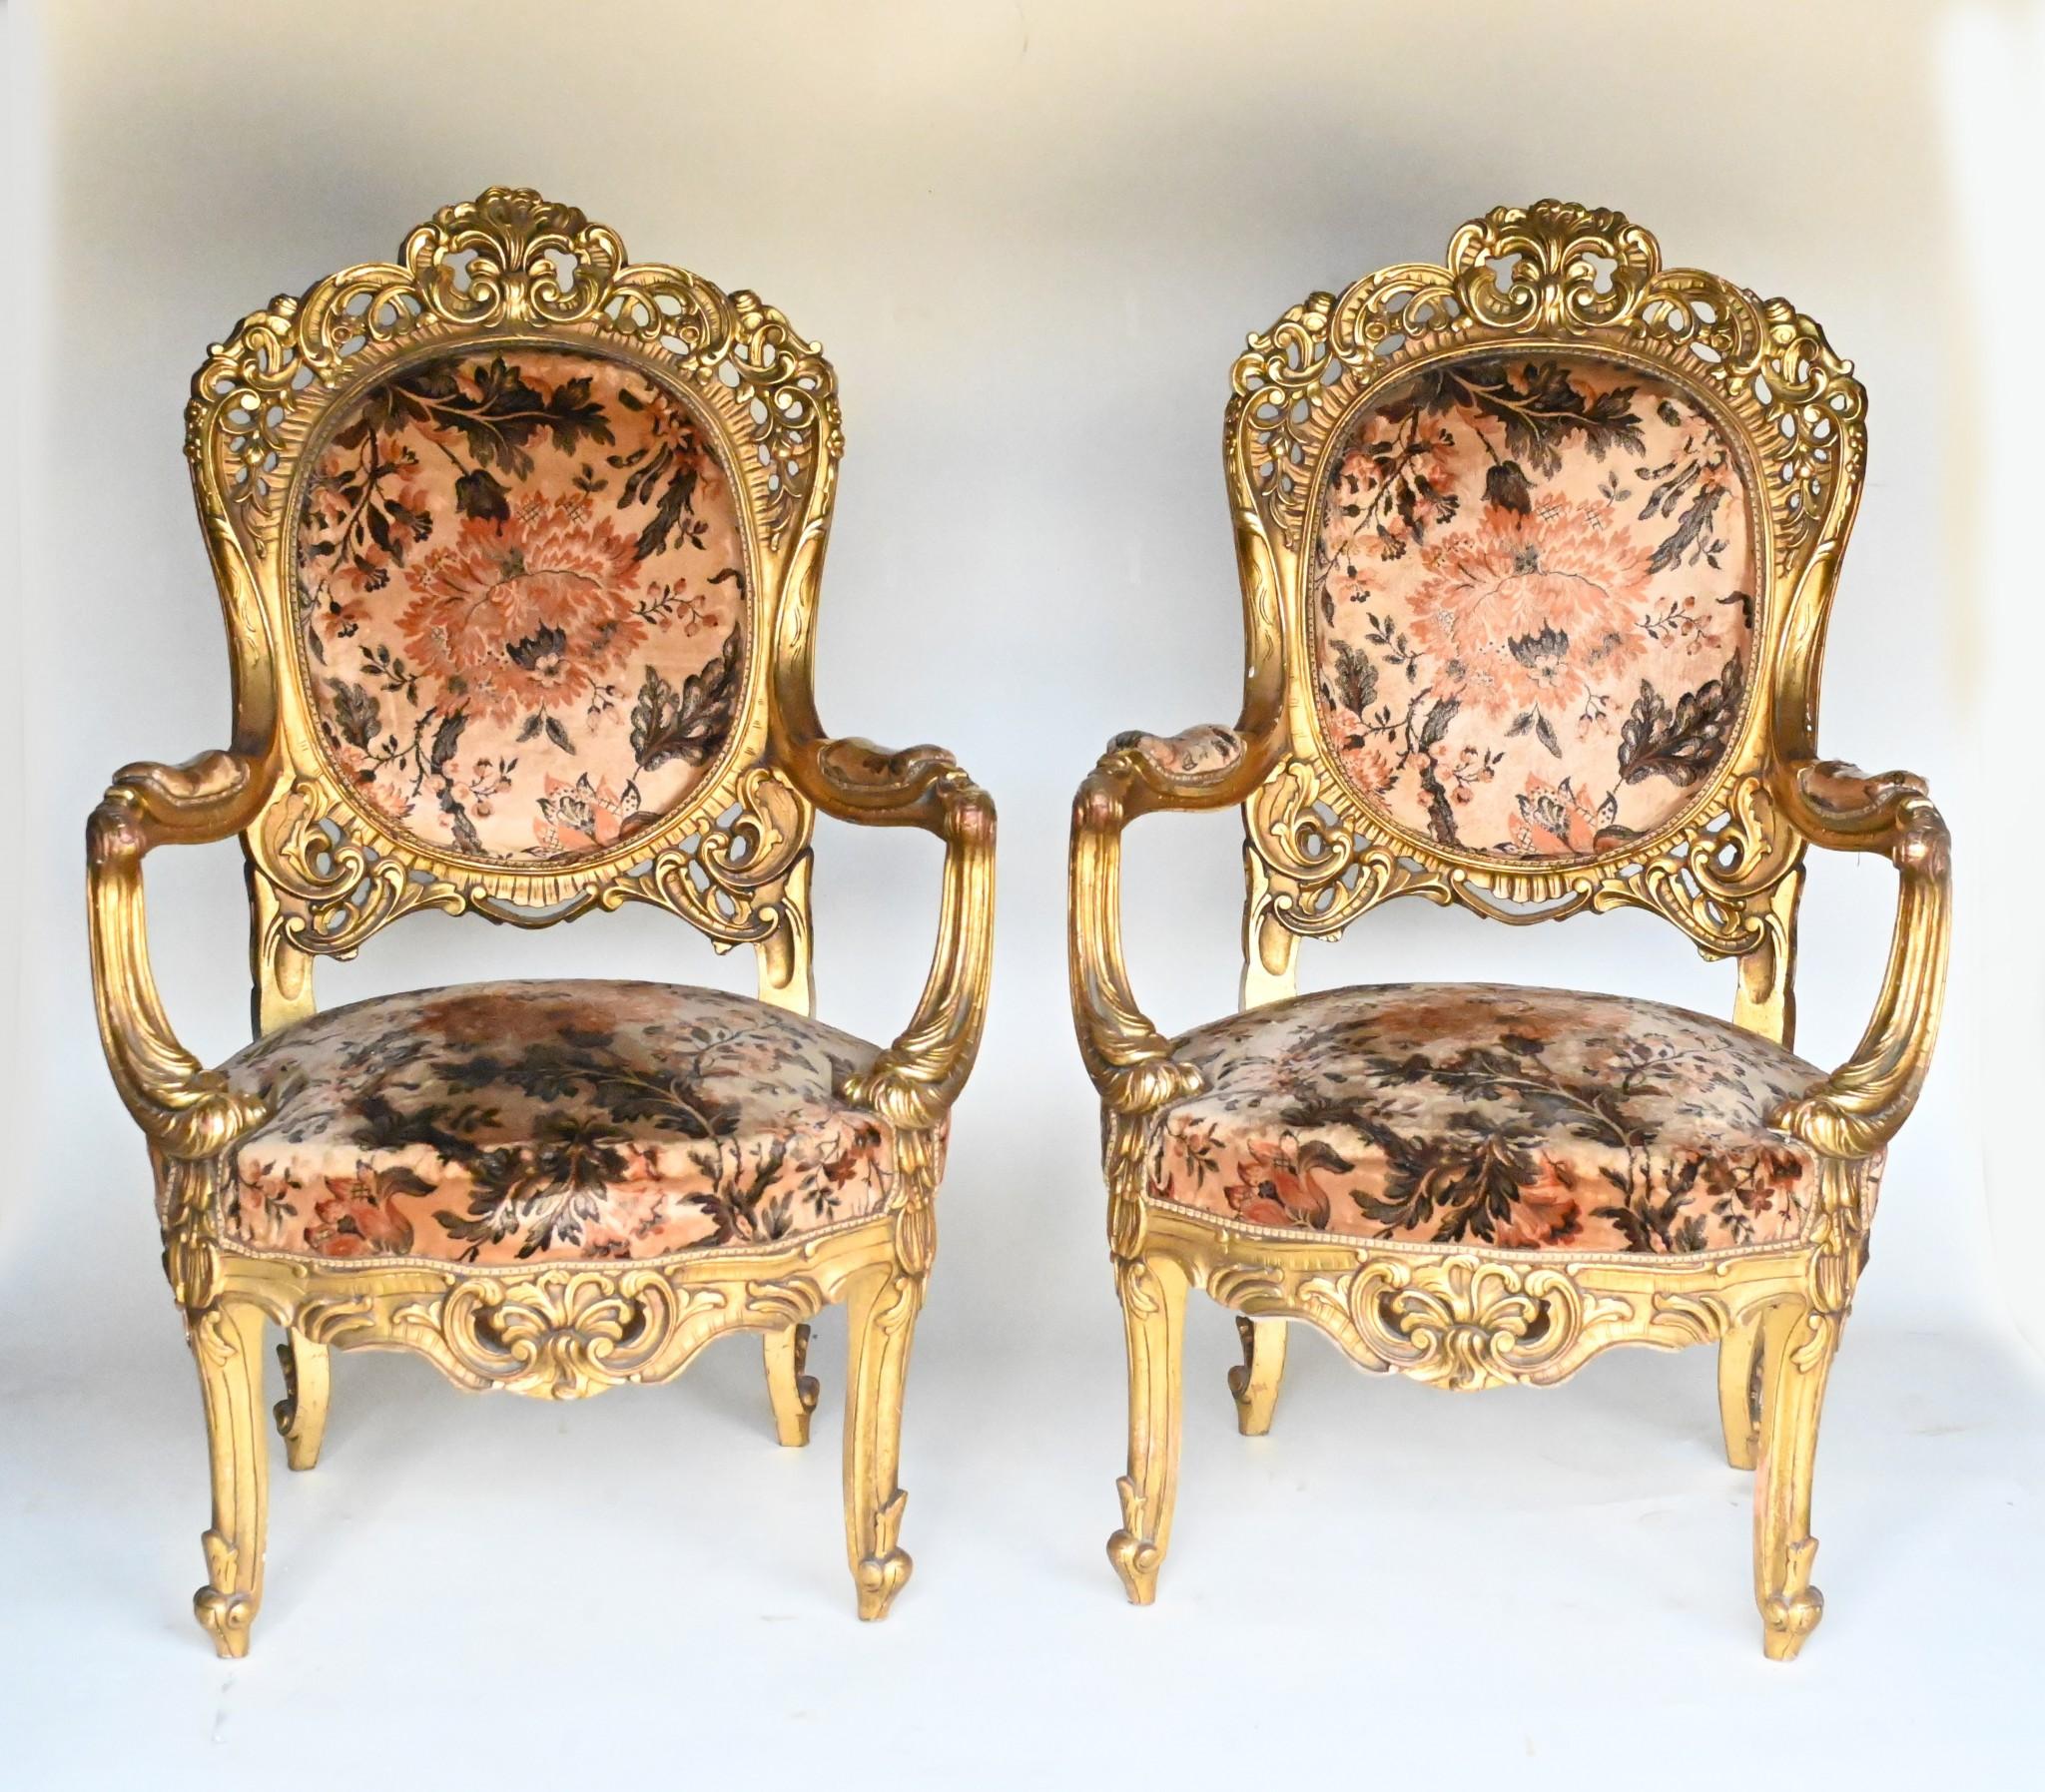 Absolutely stunning pair of French gilt arm chairs
Perfect salon chairs and in the art nouveau style with floral motifs and a flowing style to the aesthetic
Very comfortable with wide arms and cushioned seats and backs
Reupholstered with floral